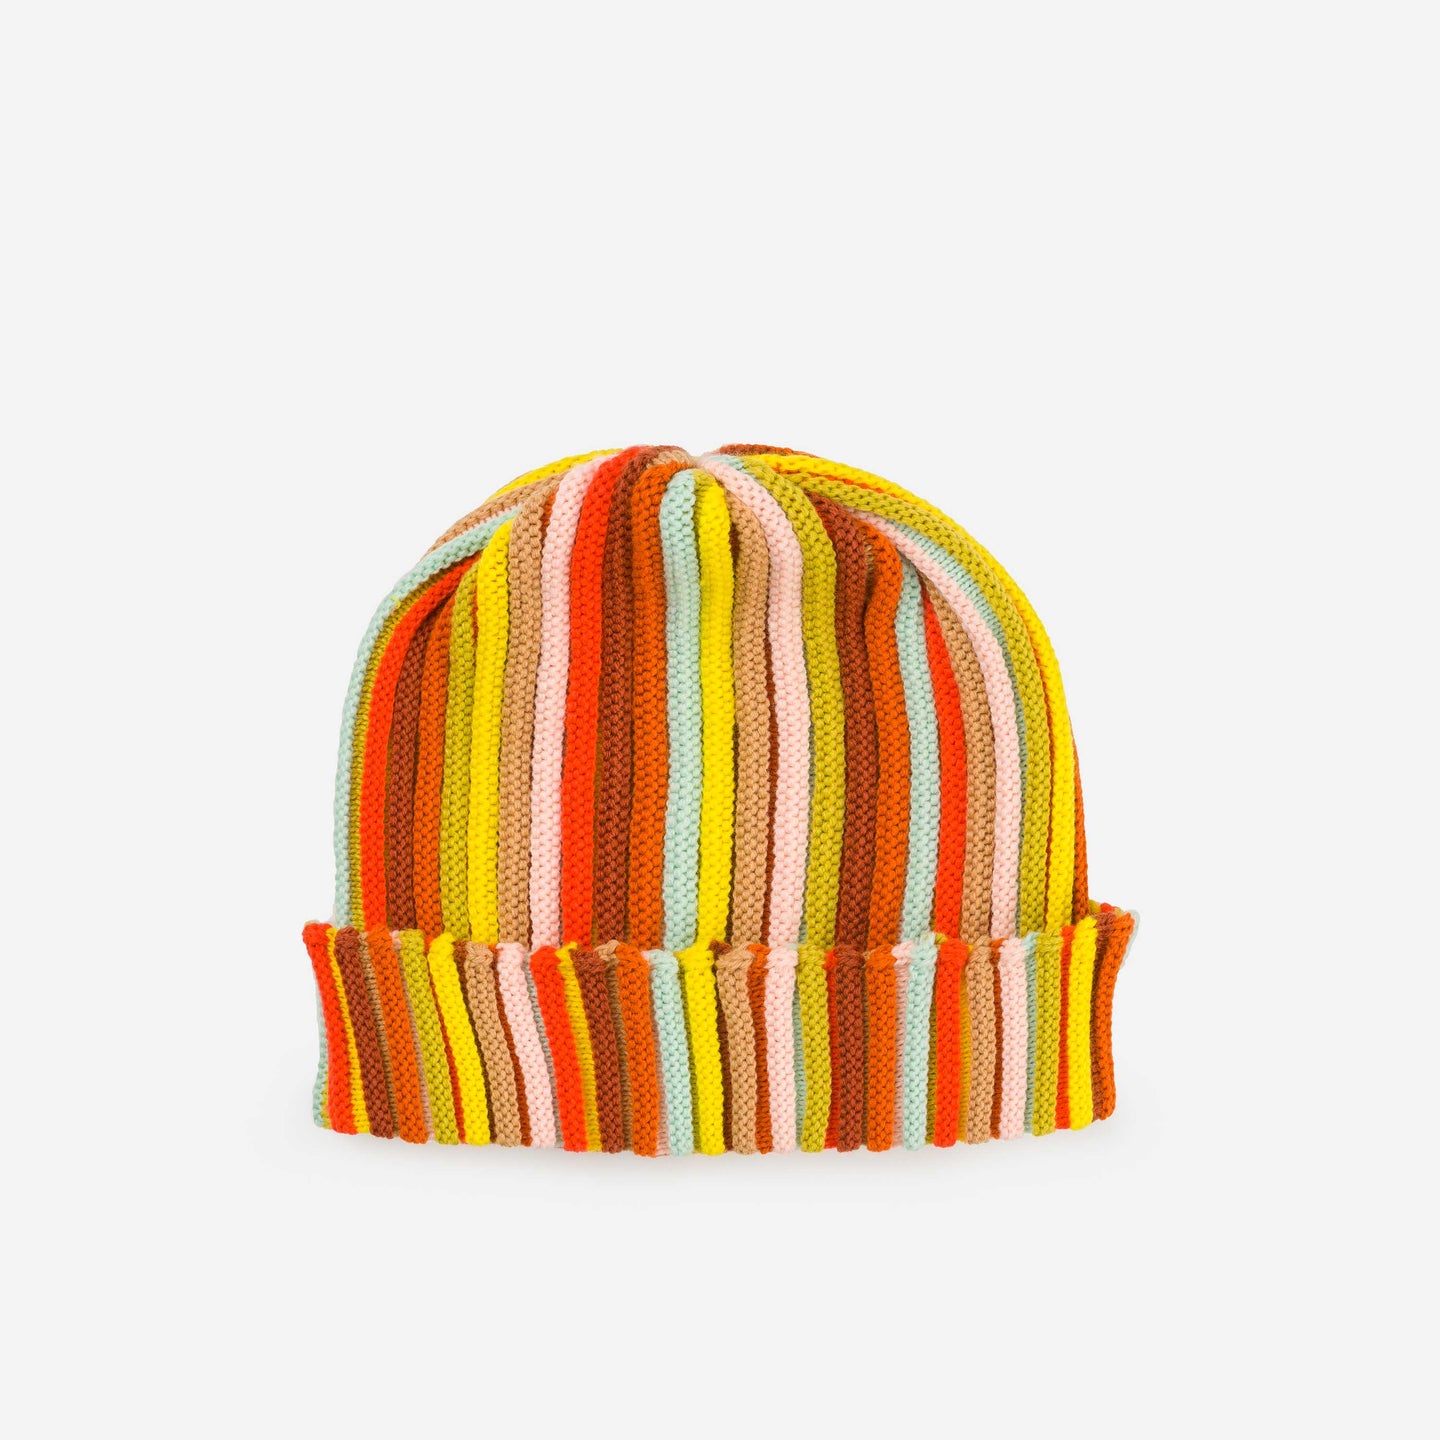 Circus Beanie Rib Knit Stretch Hat Unisex Mens One size Fun colorful hat